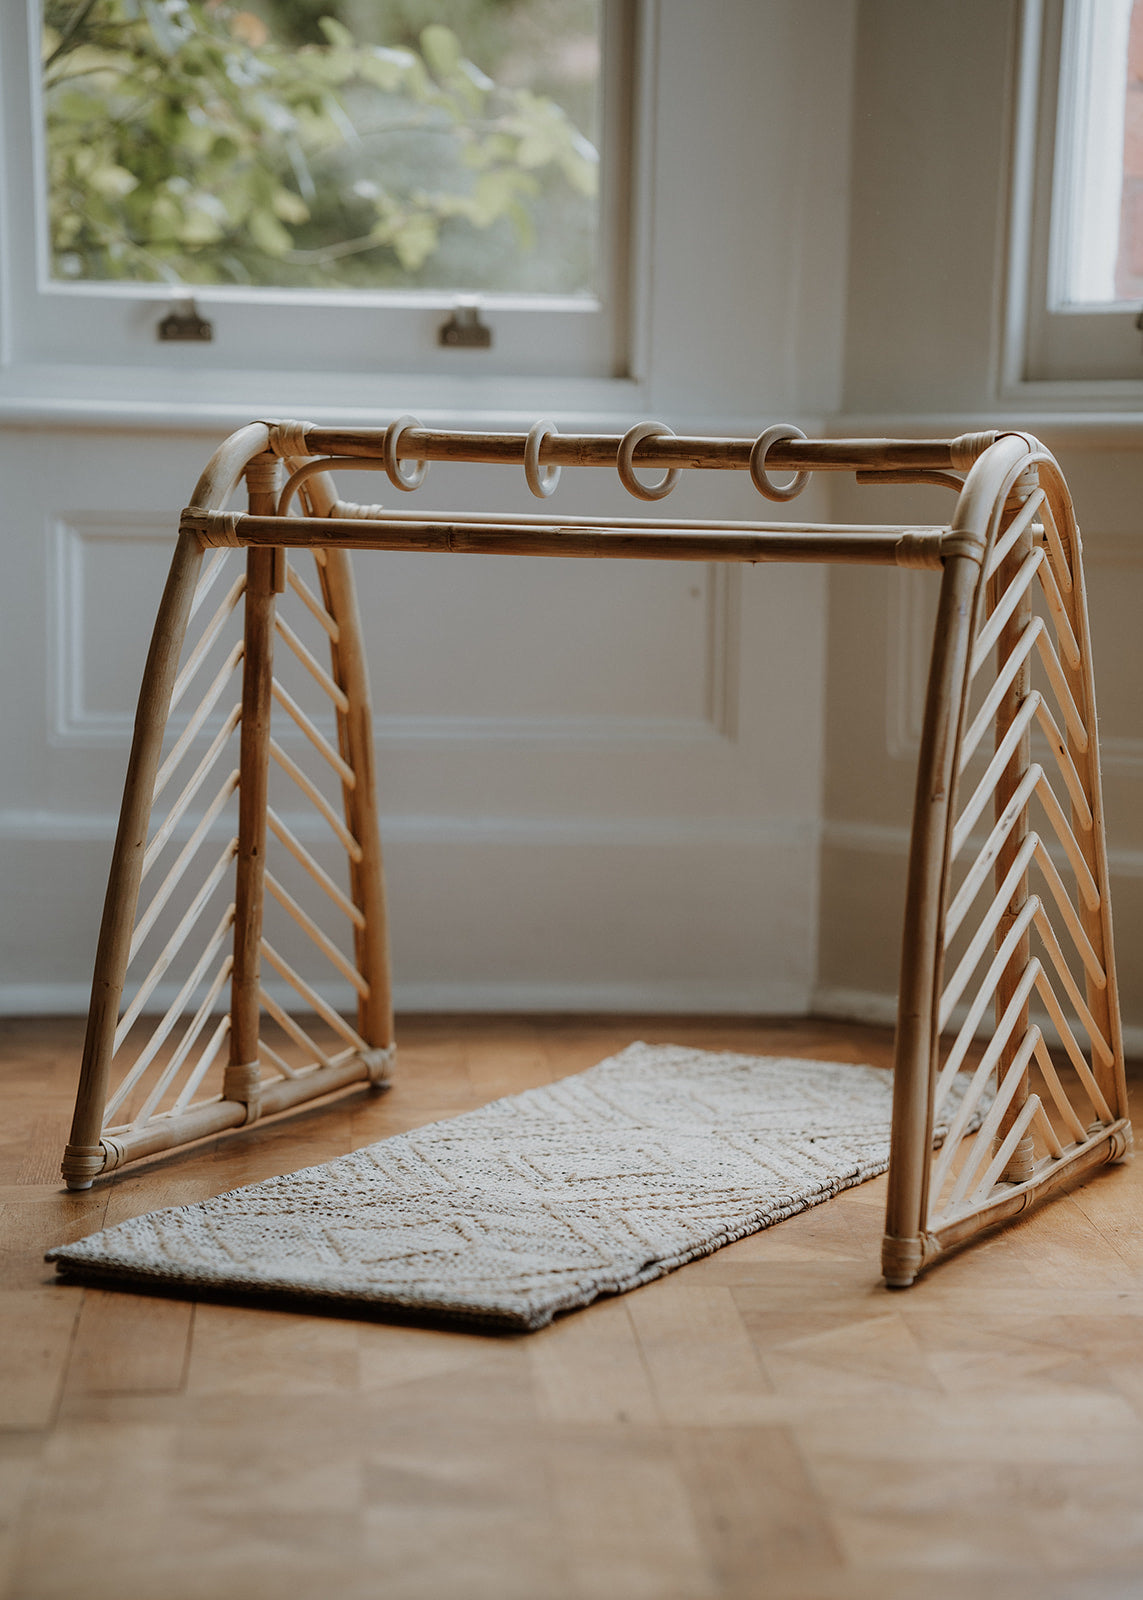 Rattan baby play gym (no toys included)